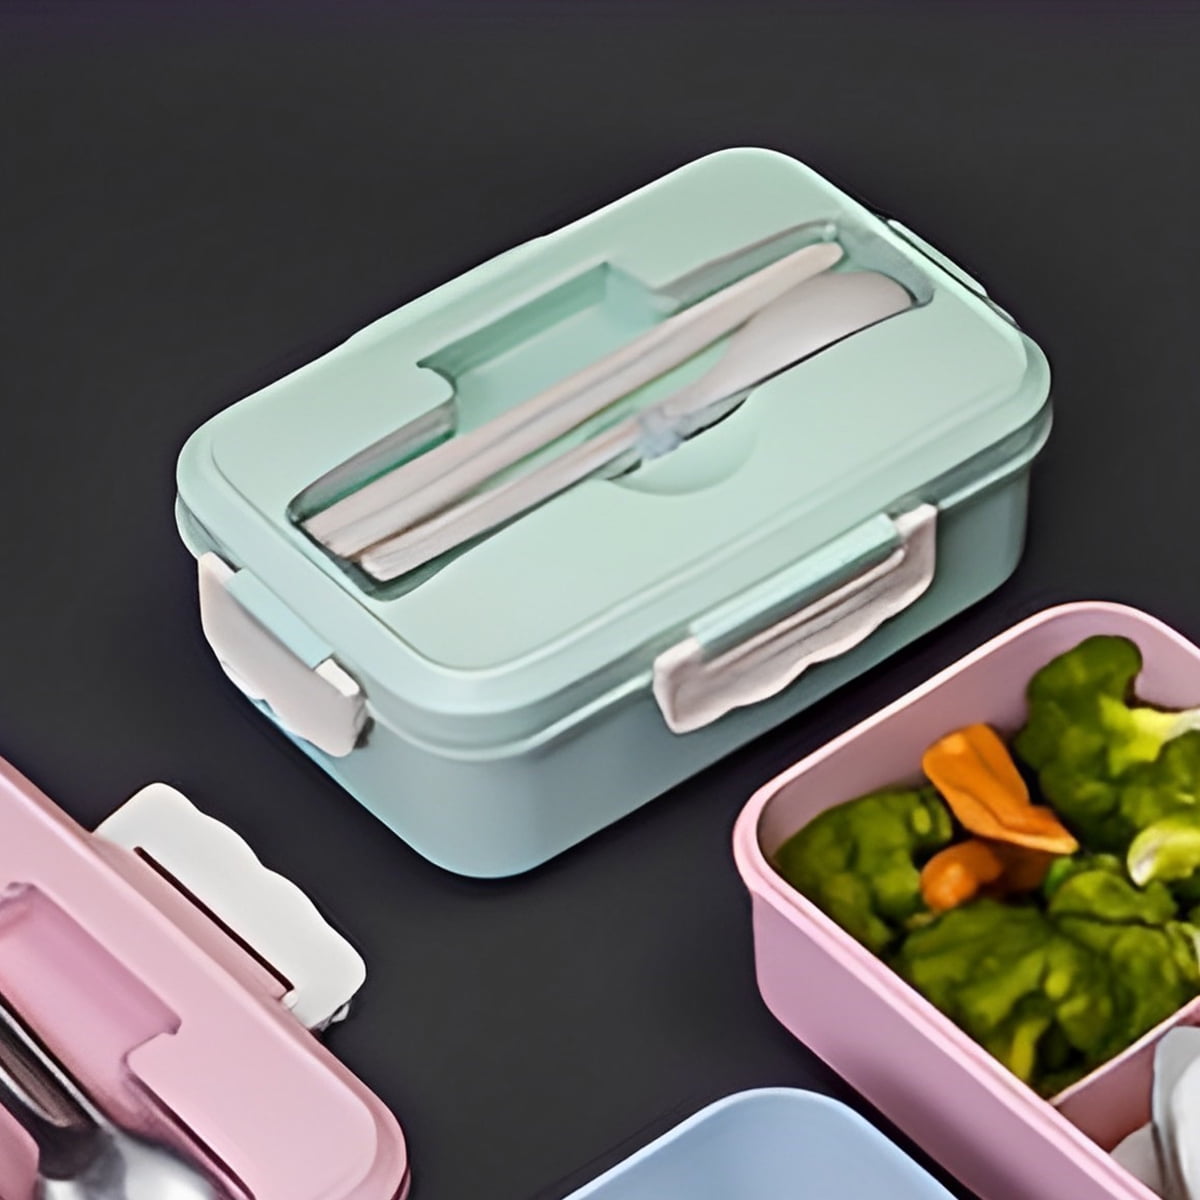 Thermal Lunch Box Bento Lunch Box with Stainless Steel Thermal Insulation,  Aousthop 1 Layer of Food Containers Leak Proof For Kids, Adult KEEP FOOD